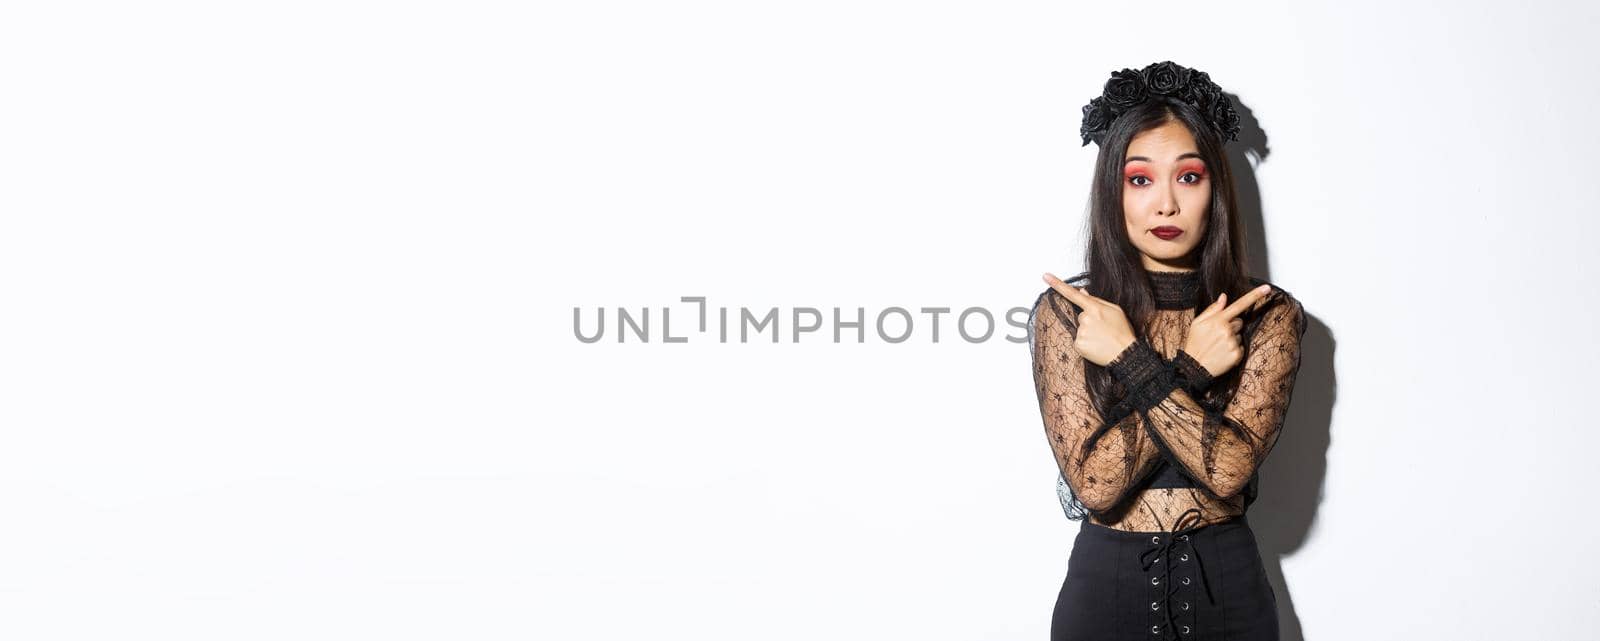 Confused pretty young woman in elegant black lace dress and wreath looking unsure, pointing fingers sideways, showing two variants, halloween banners, standing over white background.